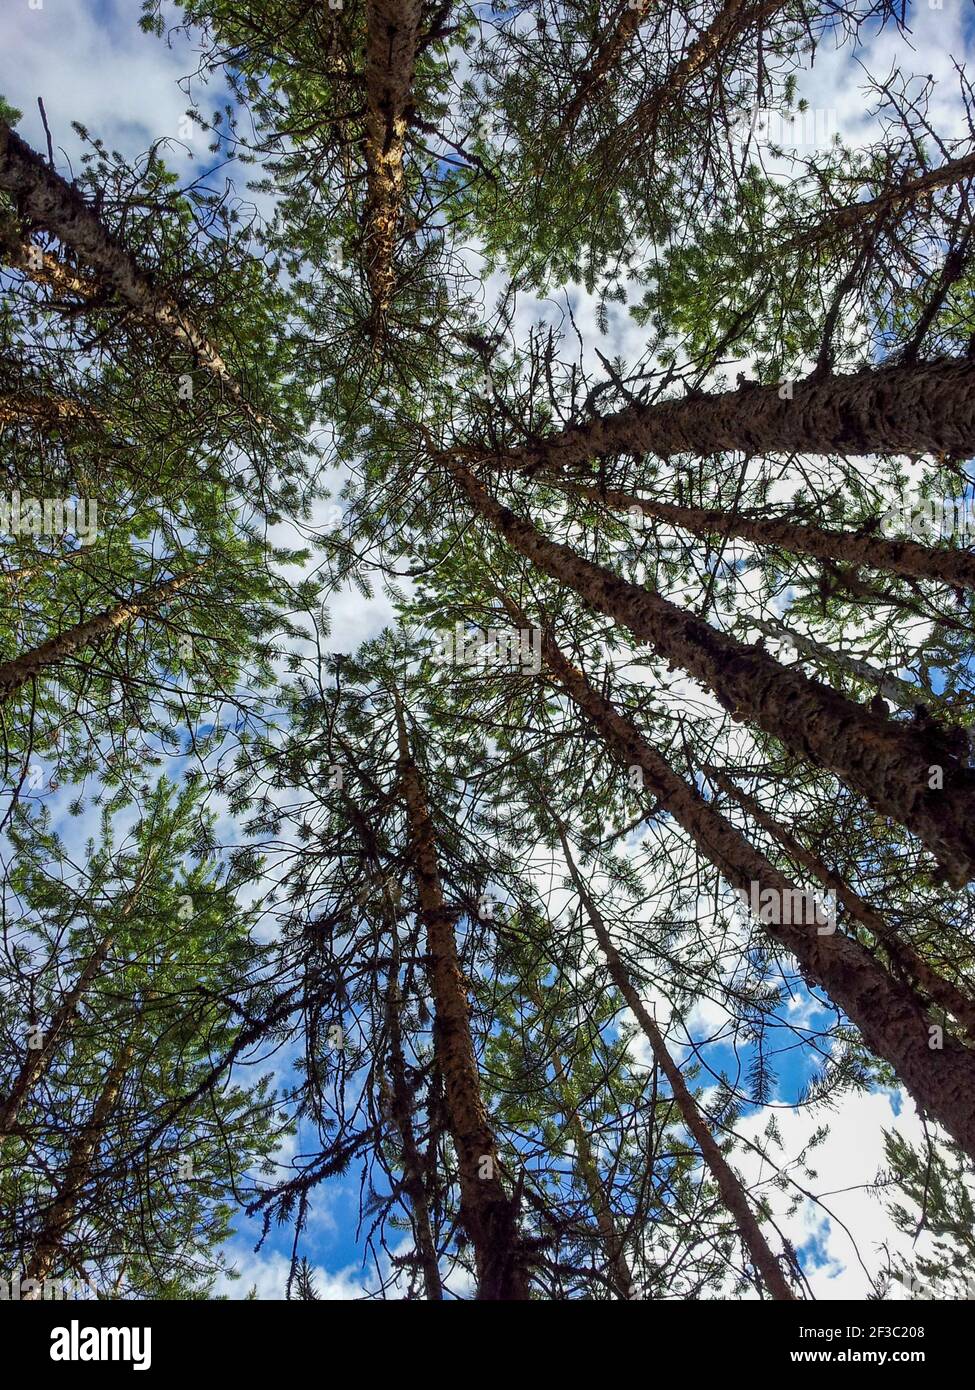 A vertical low angle shot of high ta pine trees in Oulanka National Park, Finland Stock Photo